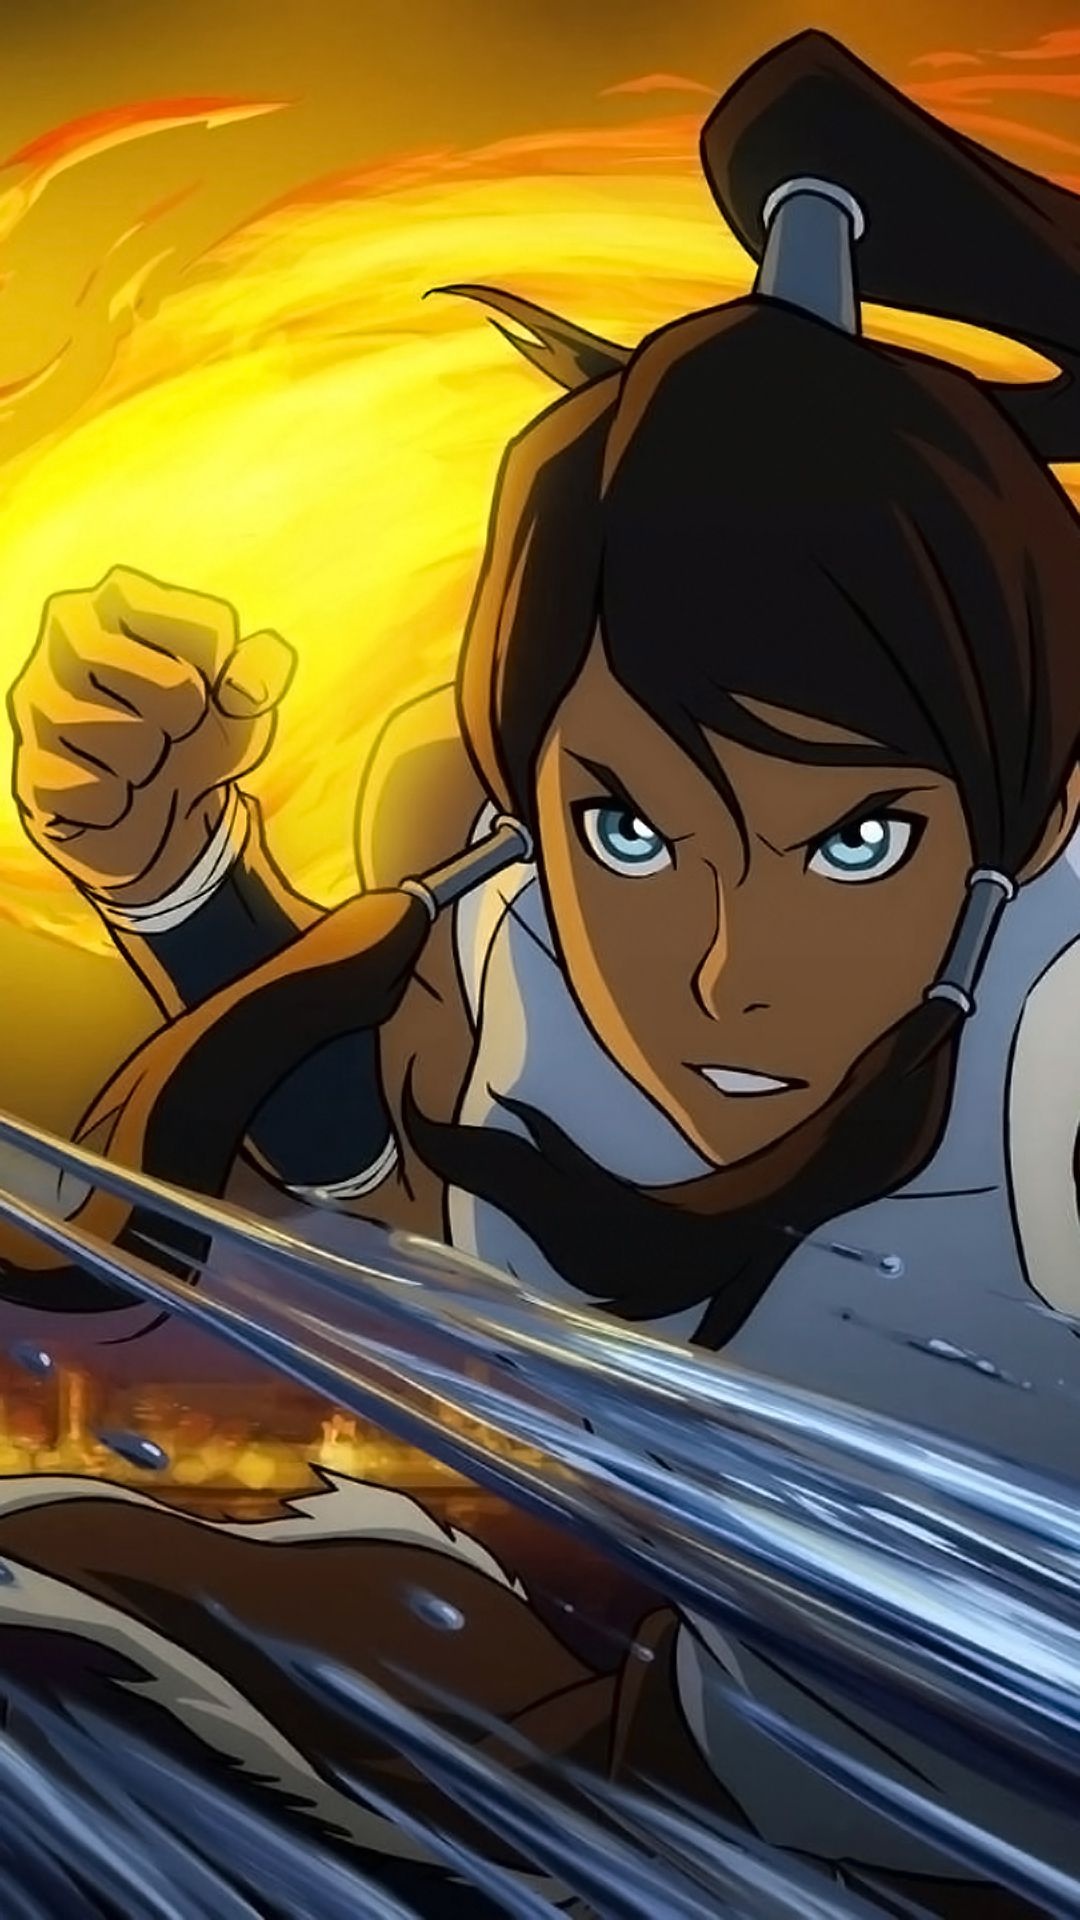 Legend of Korra wallpaper, HD quality, Epic series, Action-packed, 1080x1920 Full HD Handy